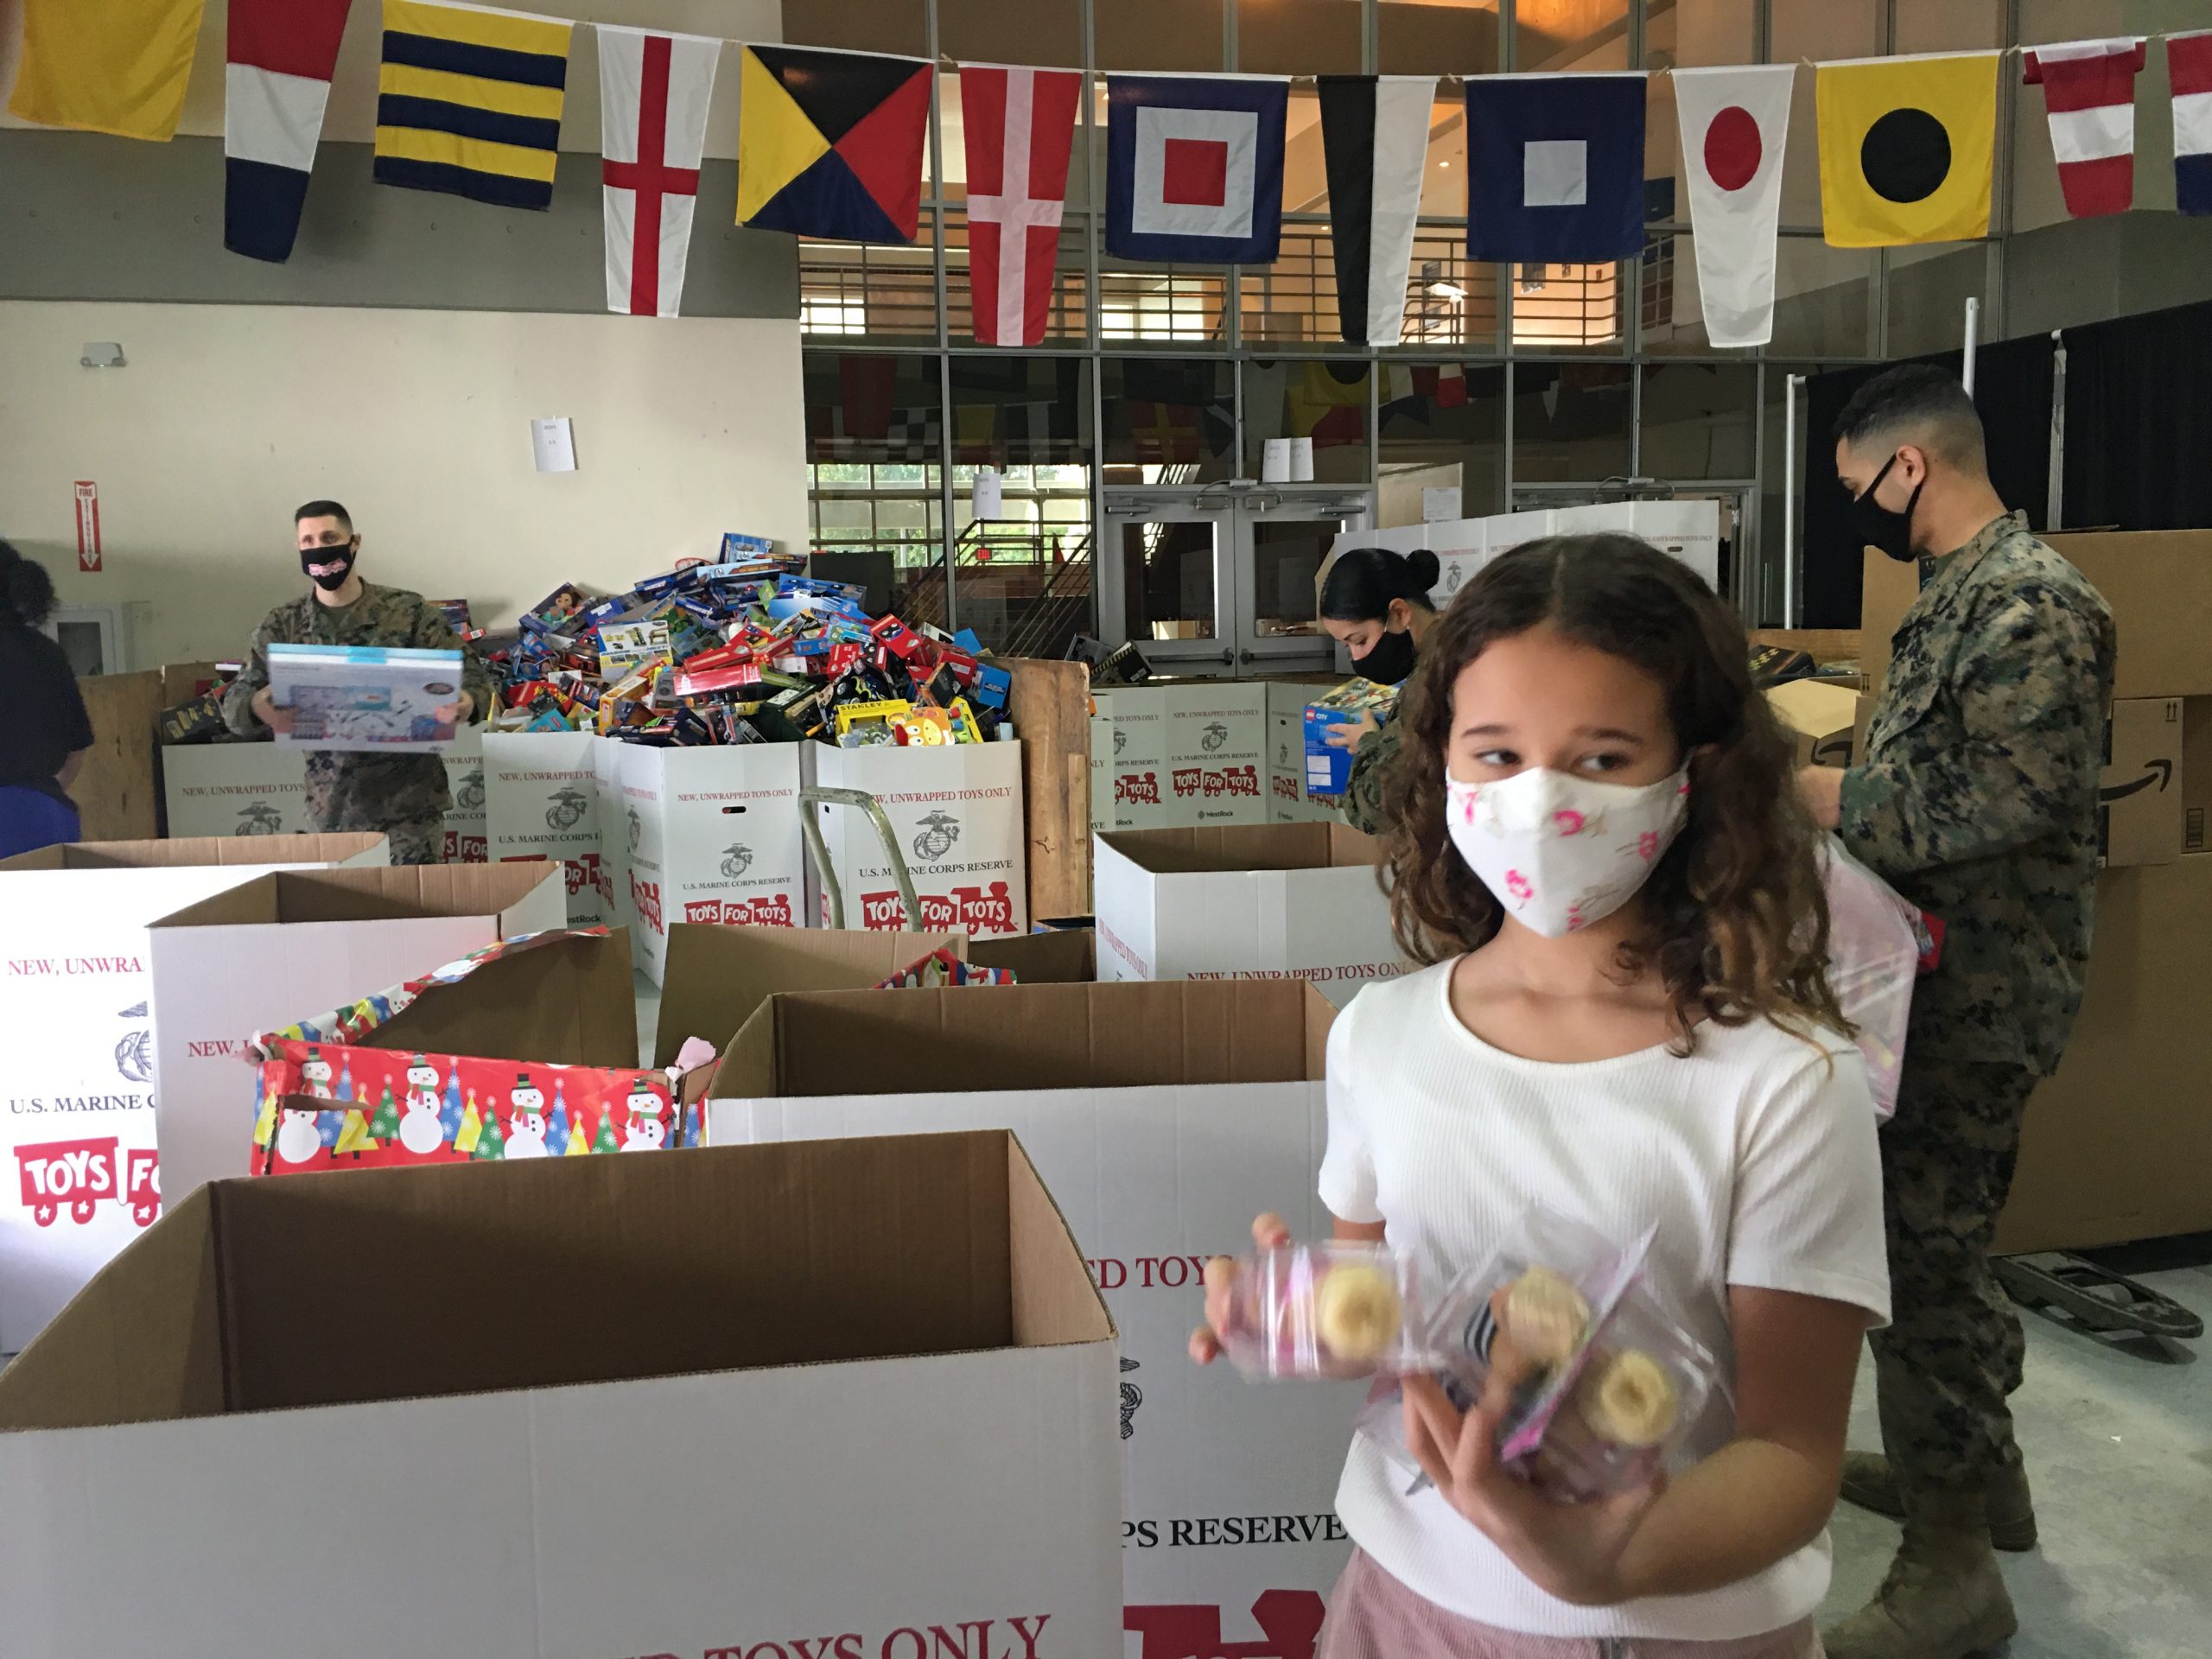 Image: Adita's daughter colleting Toys for Tots (Toys for Tots: Making a Difference for America's Children Adita Lang Contributor Miami Mom Collective)